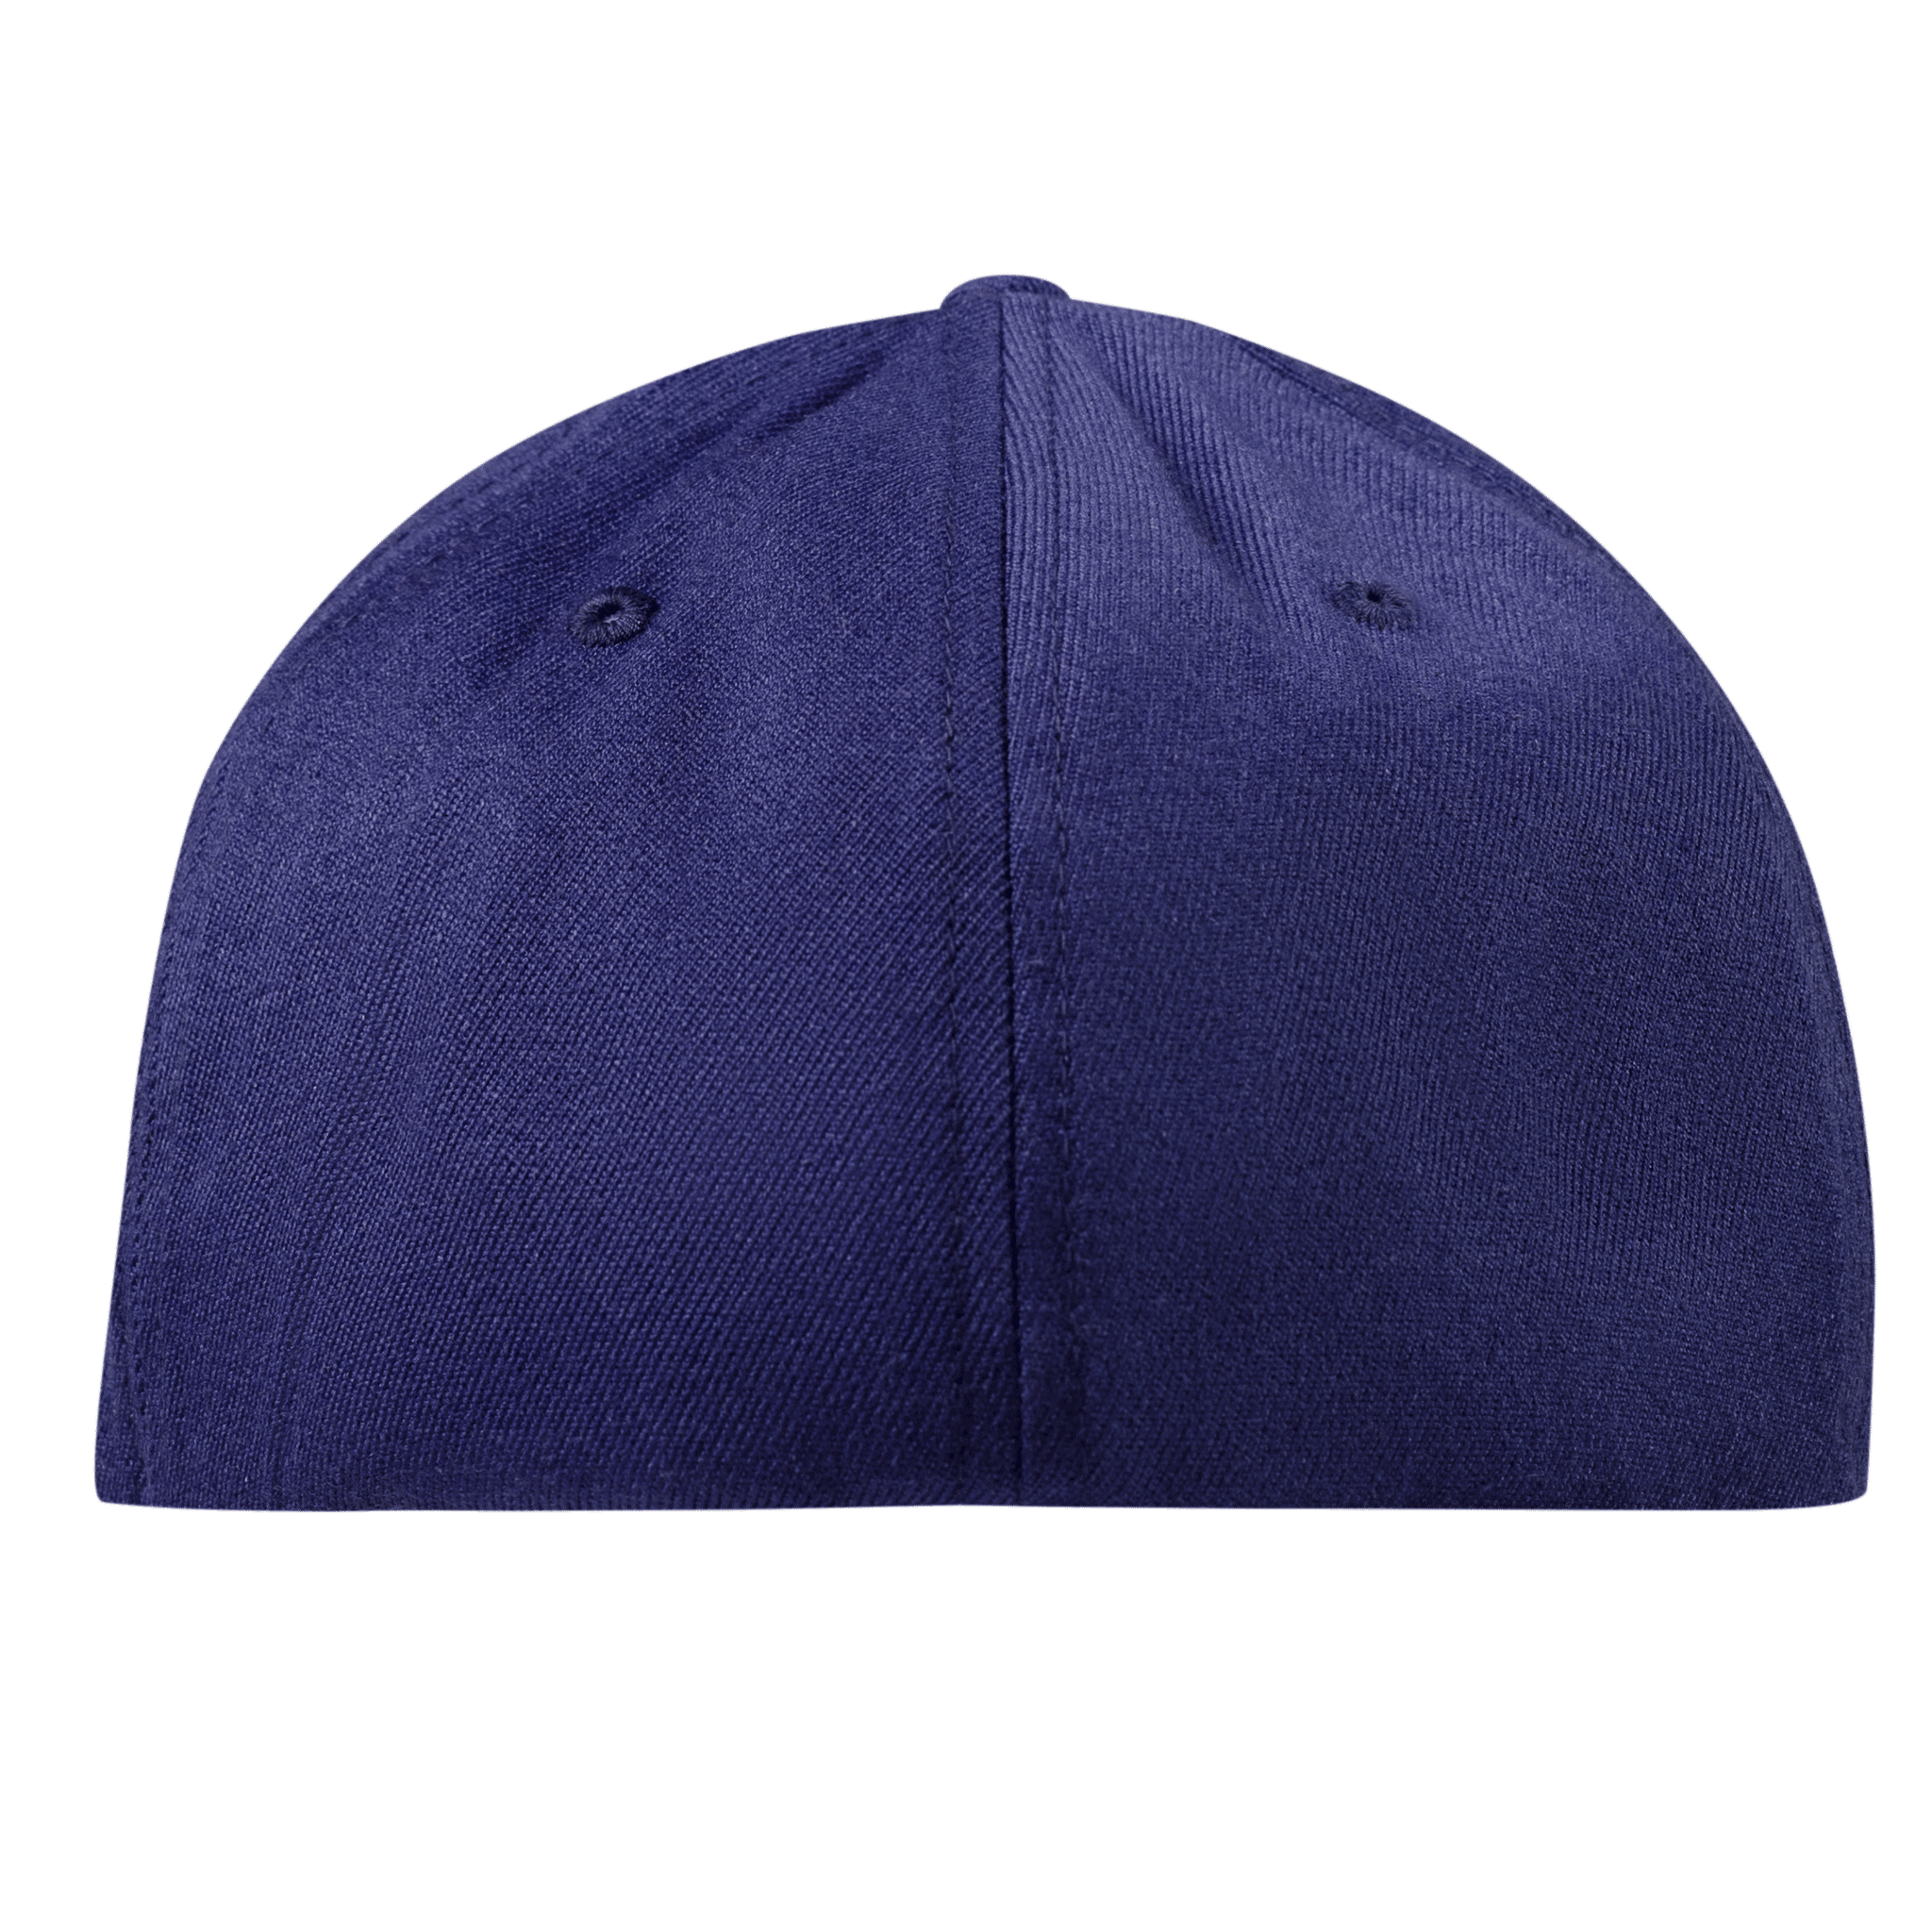 Wyoming 44 Midnight Flexfit Fitted Back Navy